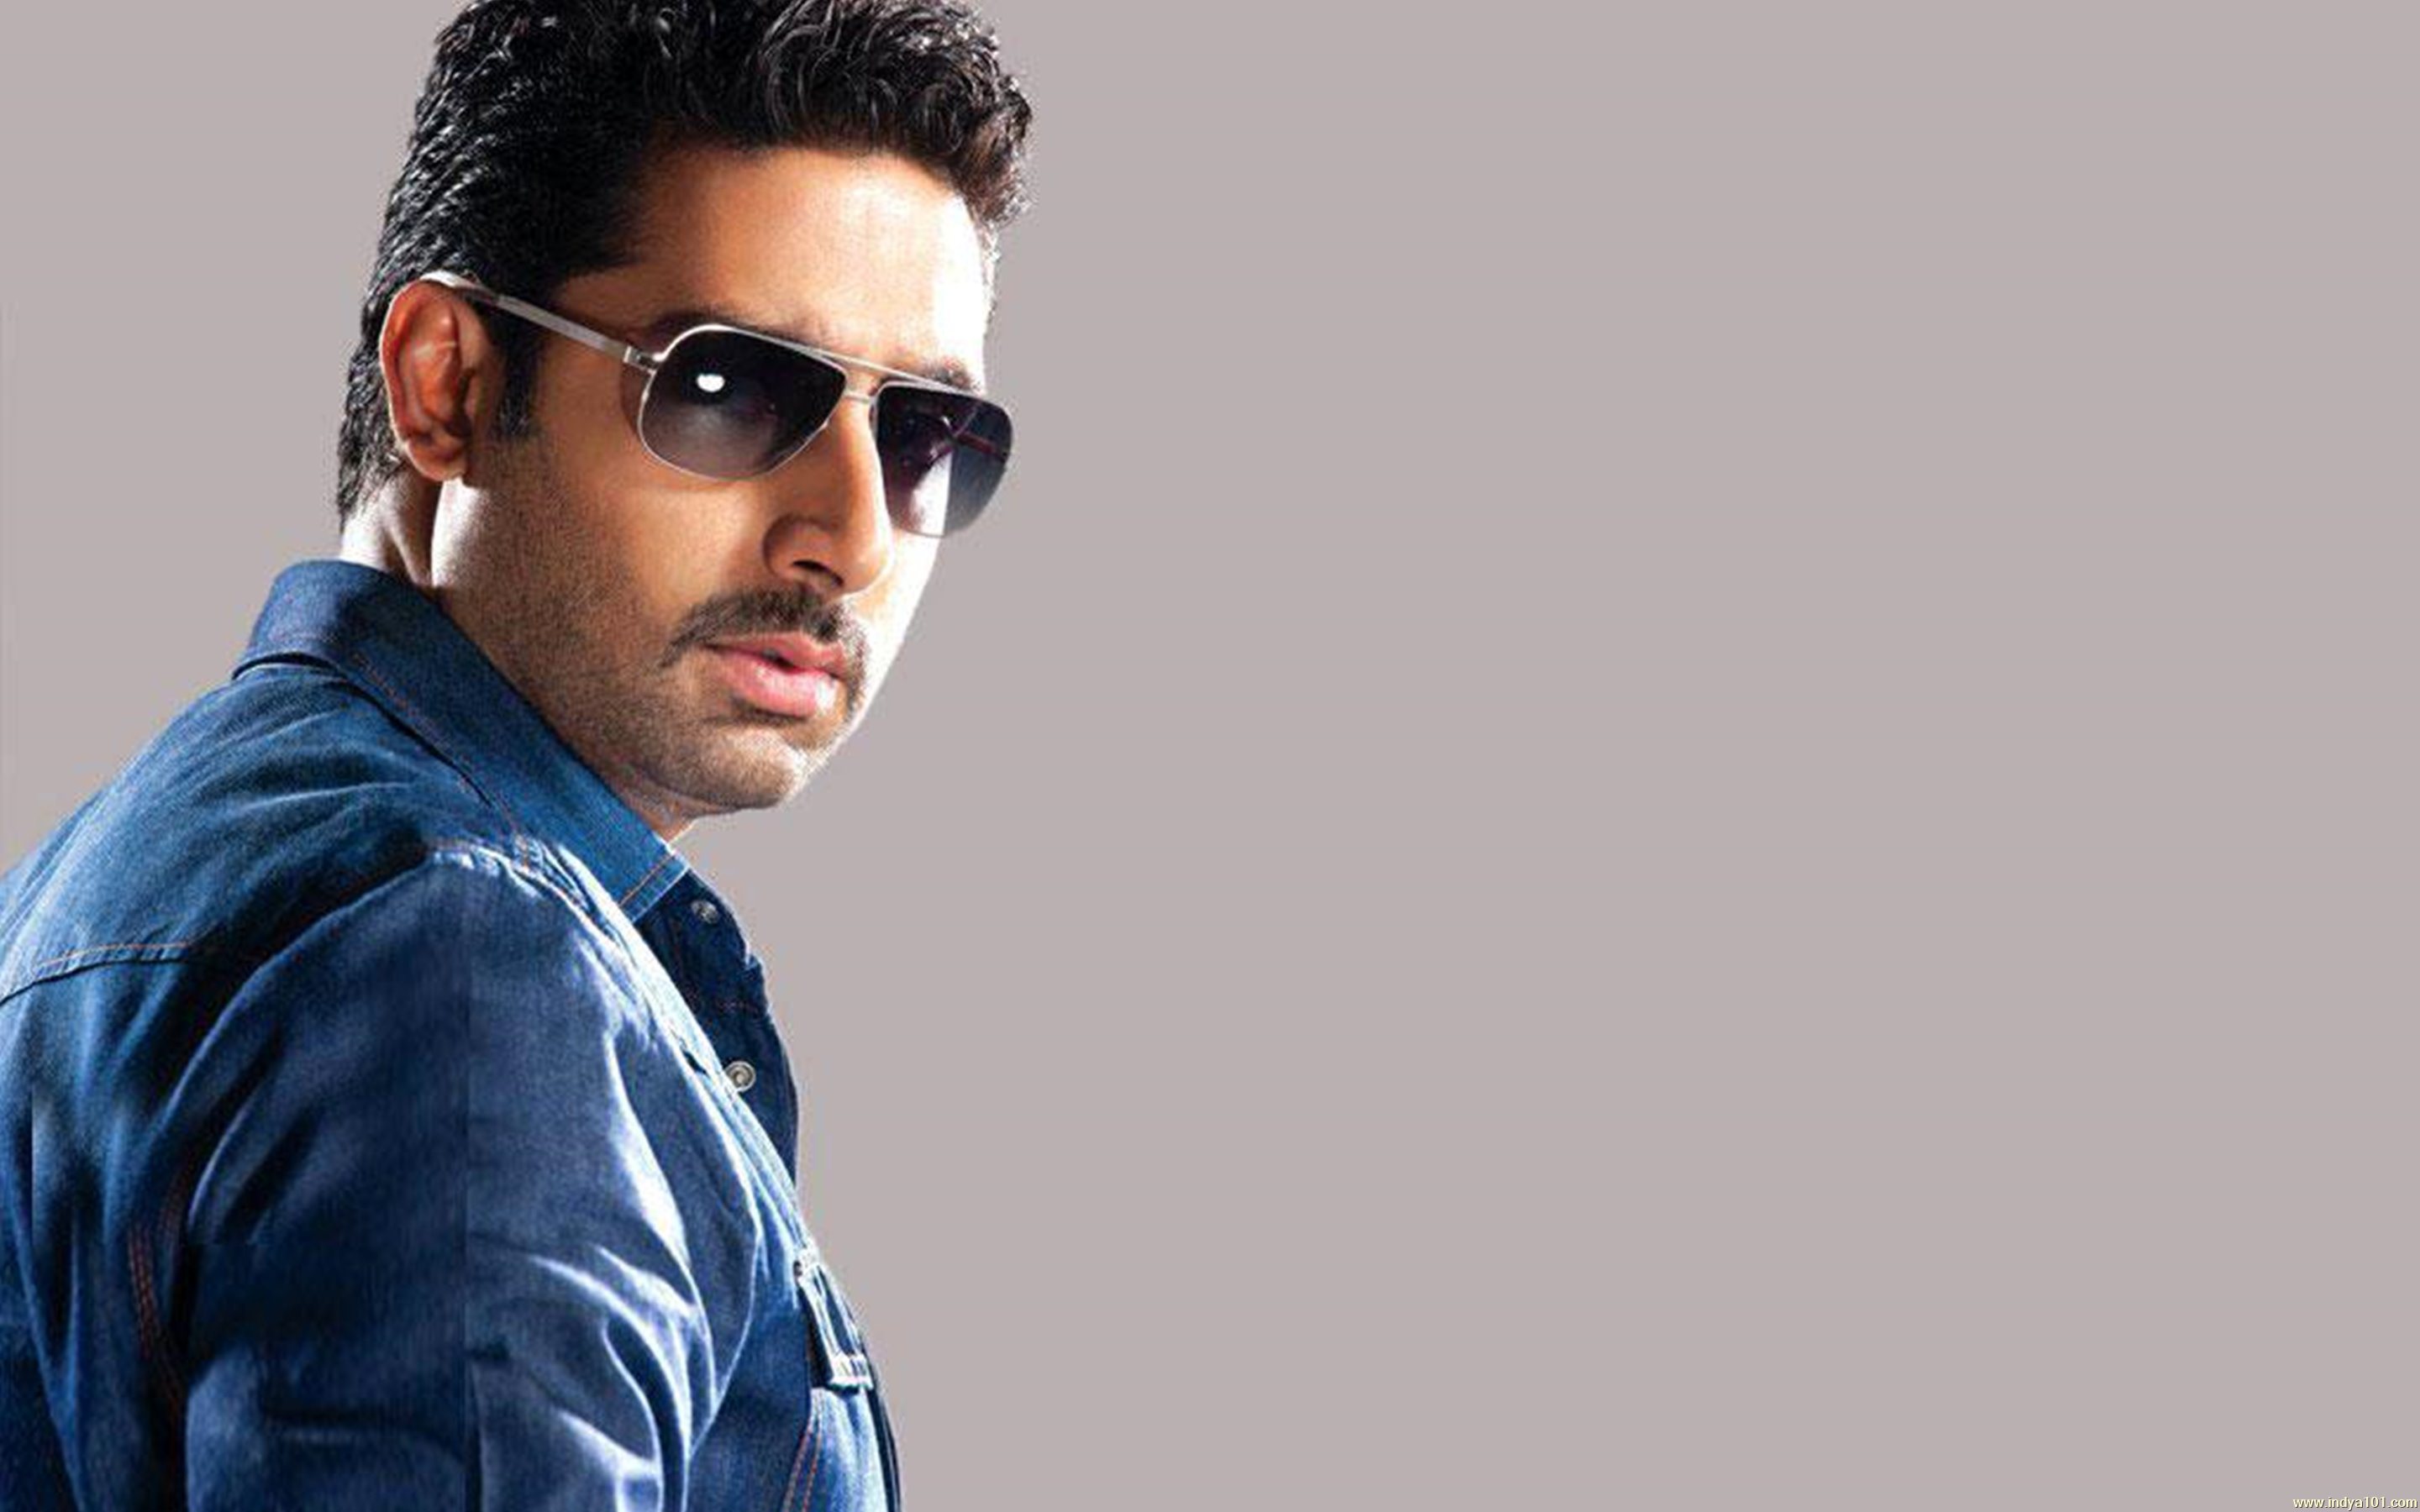 Abhishek Bachchan's next will show him as an angry young man